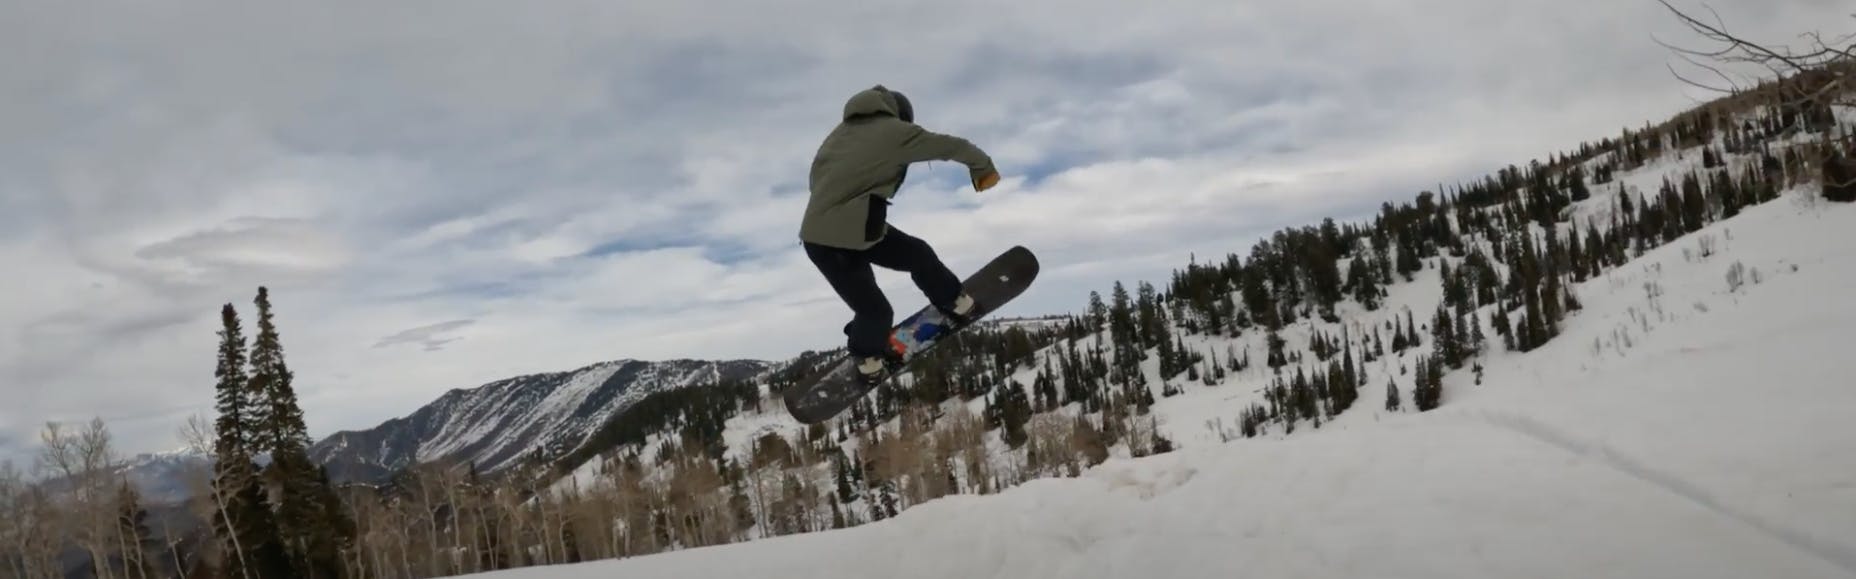 Curated Snowboard Expert Spencer Storck jumping with the 2023 K2 Afterblack snowboard